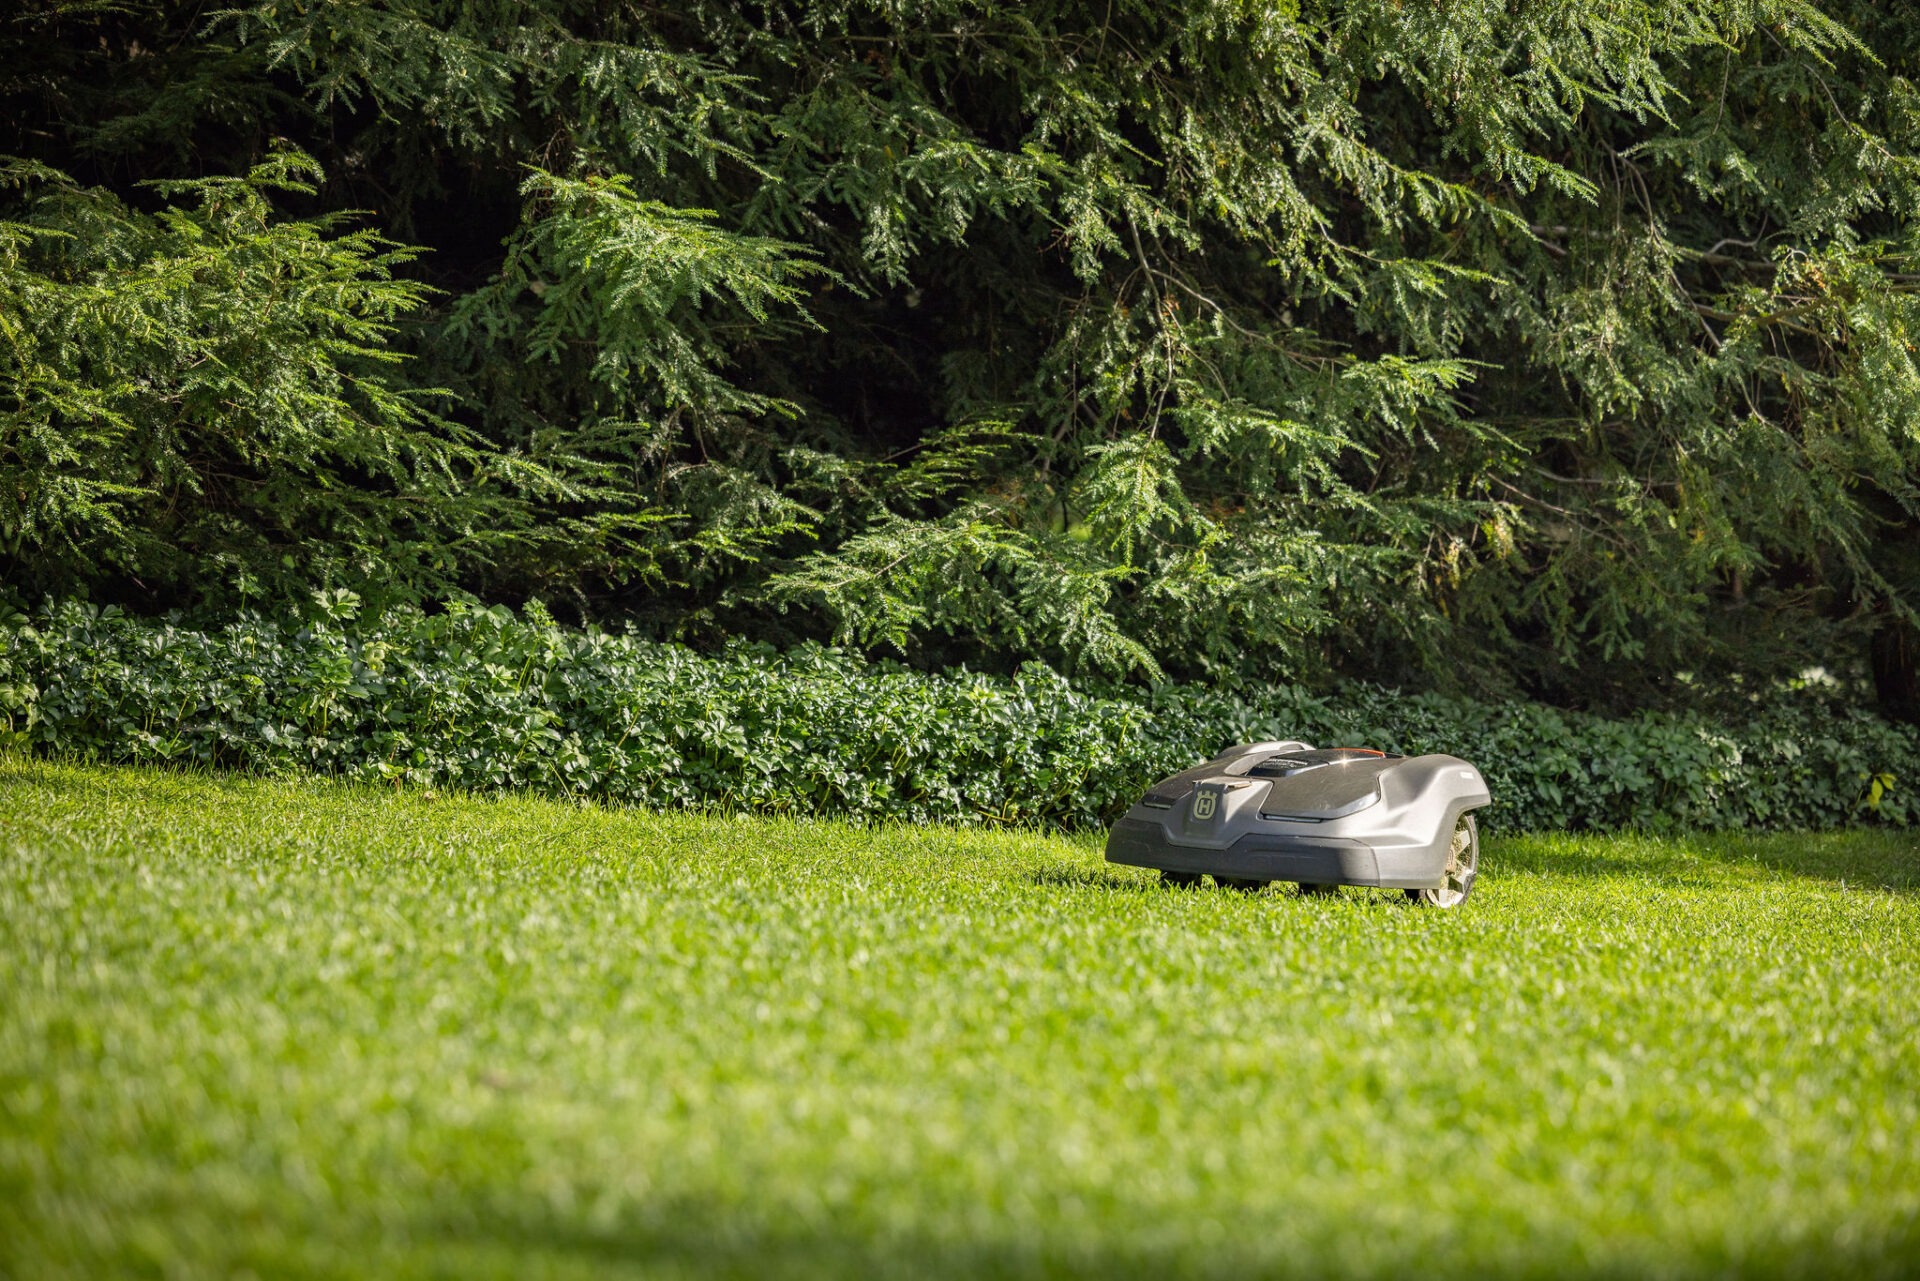 A robotic lawnmower is trimming a lush green lawn bordered by a dense cluster of trees and vegetation in bright daylight.